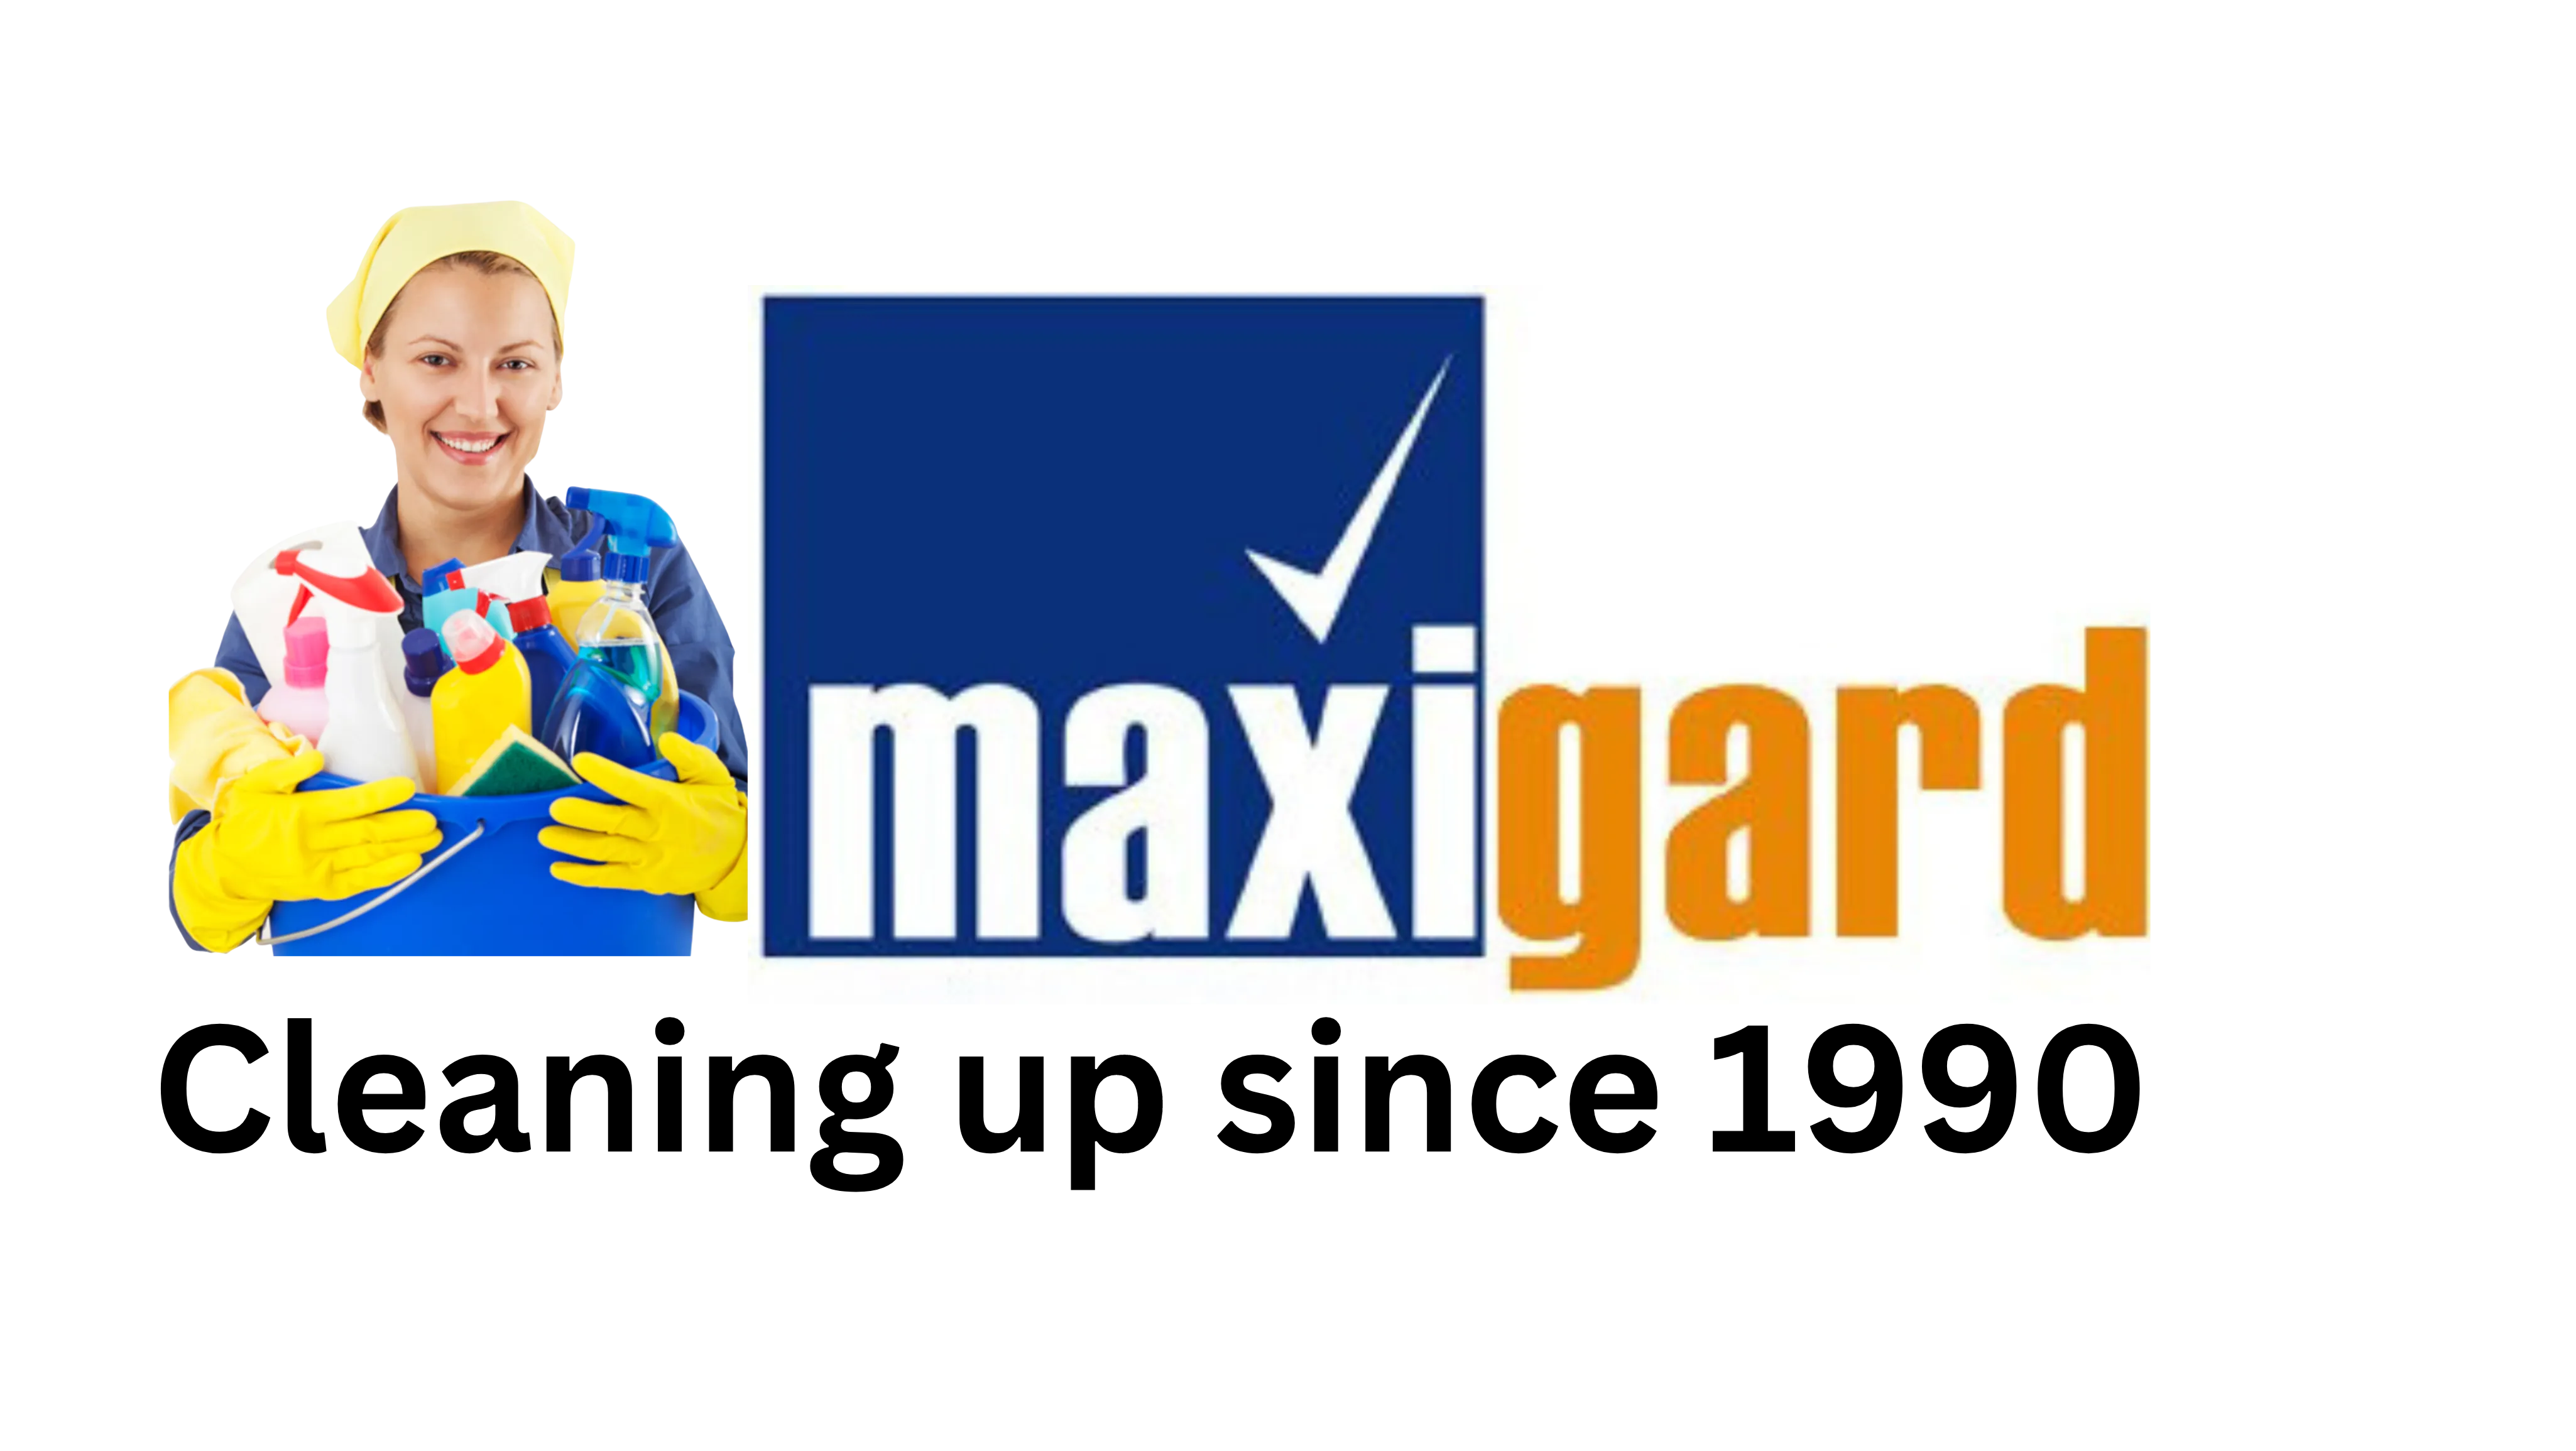 maxigard-logo-with-lady-cleaner